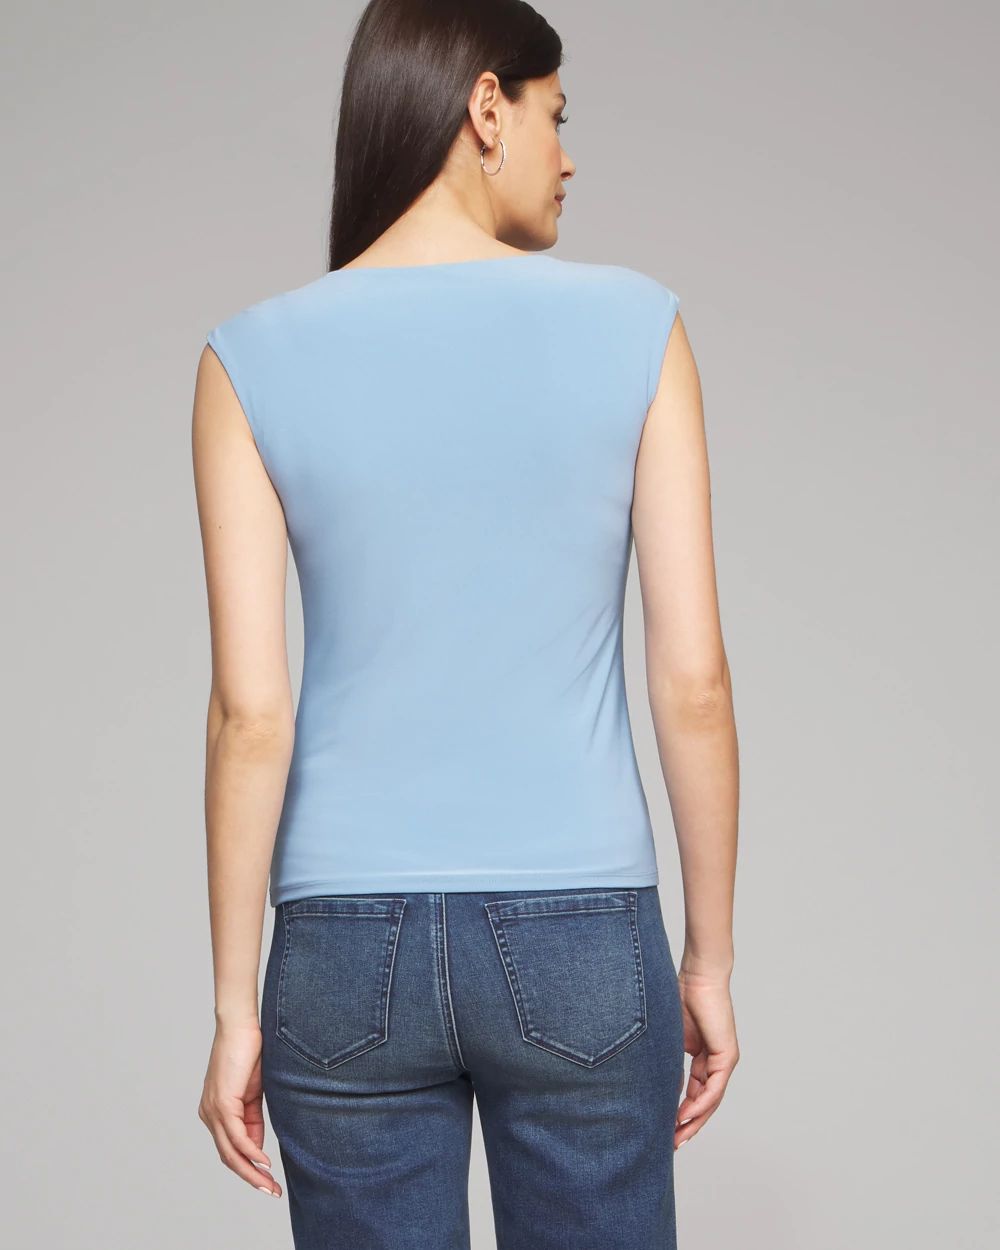 Outlet WHBM Cap Sleeve Top